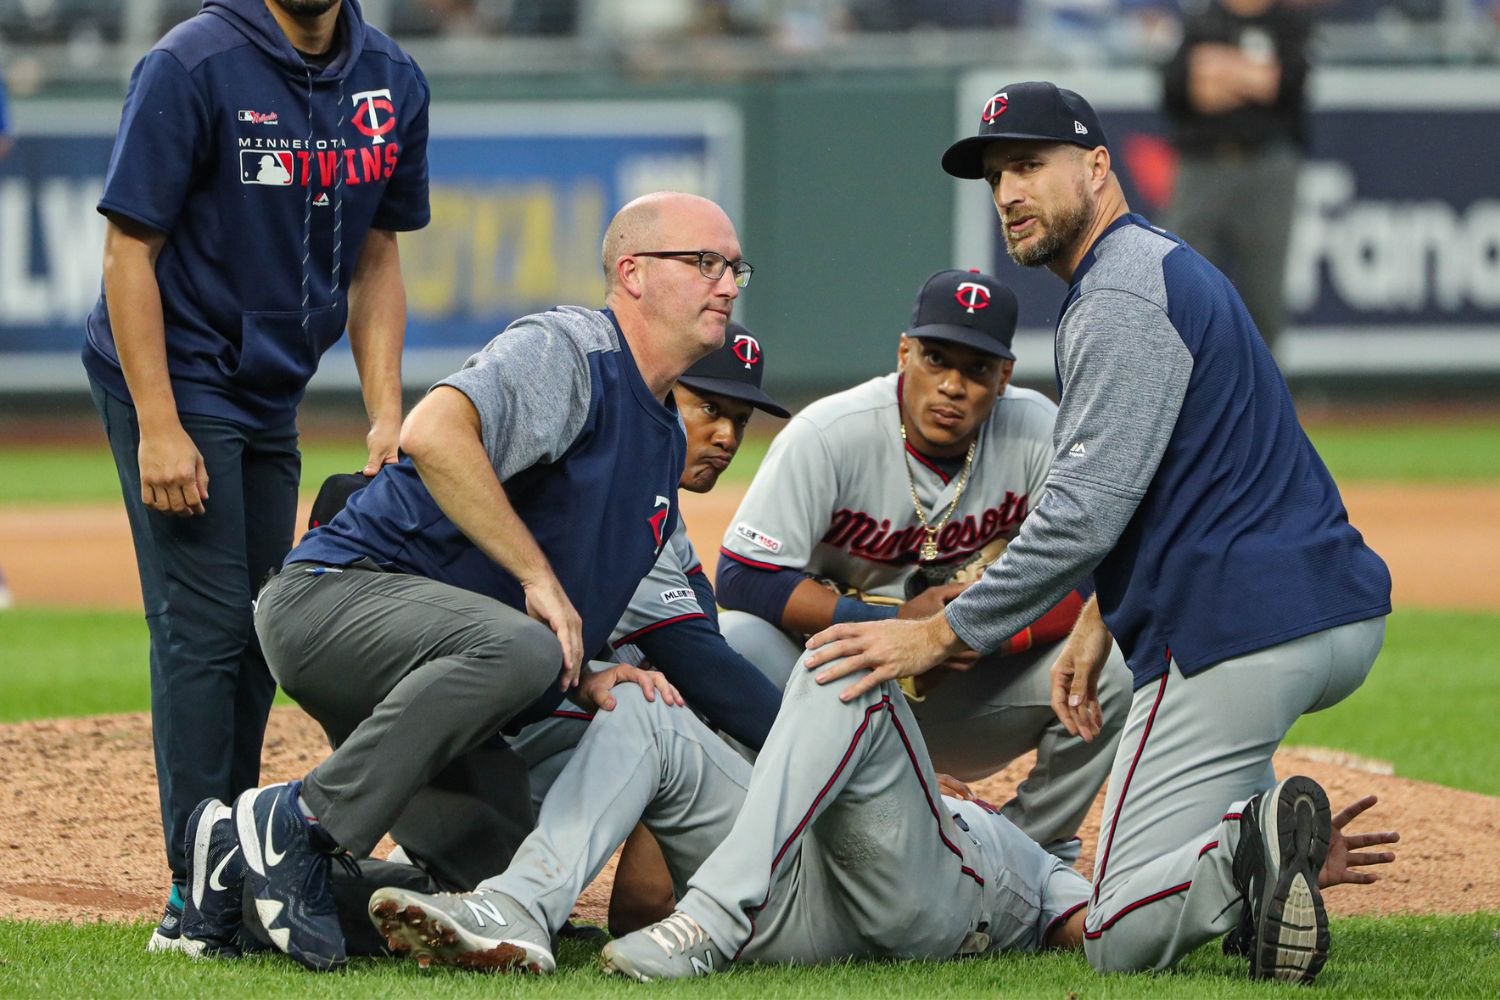 Kyle Farmer injury update: Twins SS leaves game after being hit in